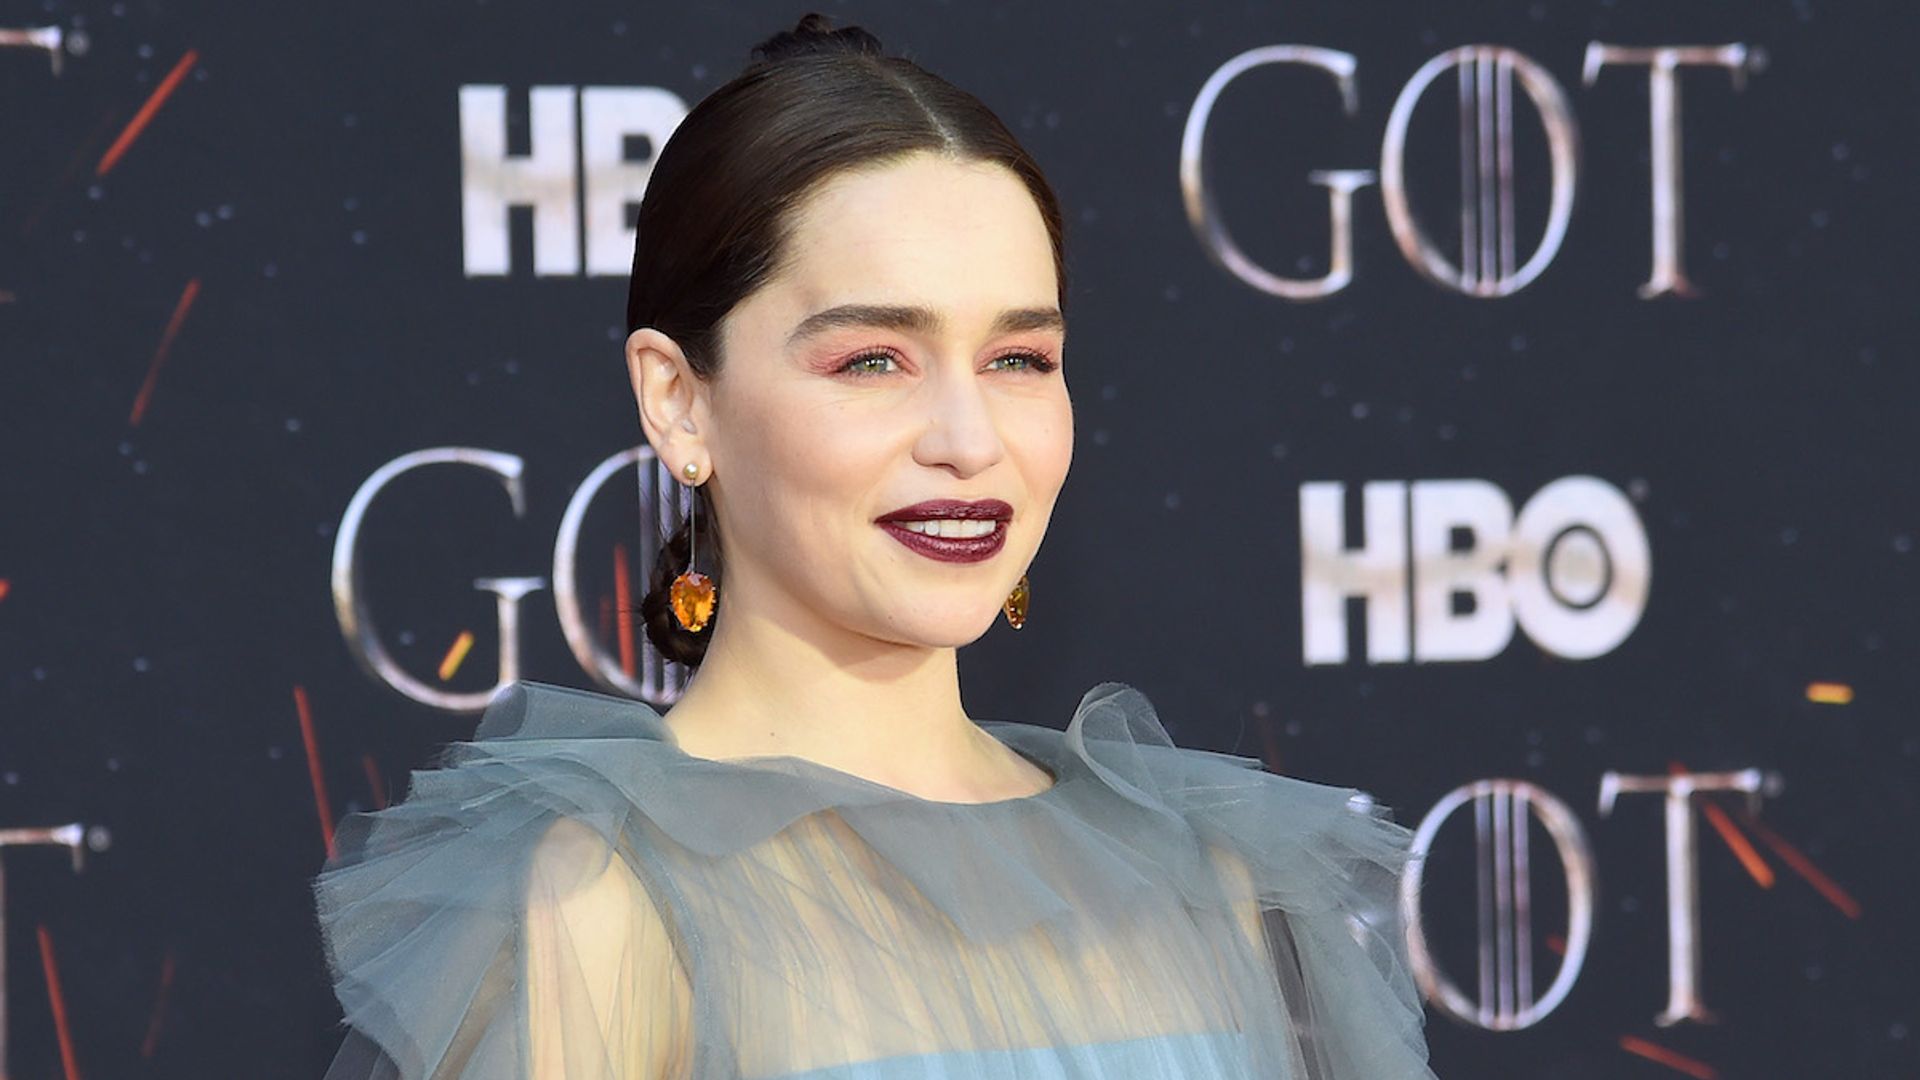 Emilia Clarke wore a Khaleesi-inspired hairstyle to the Game Of Thrones premiere, and fans LOVE it